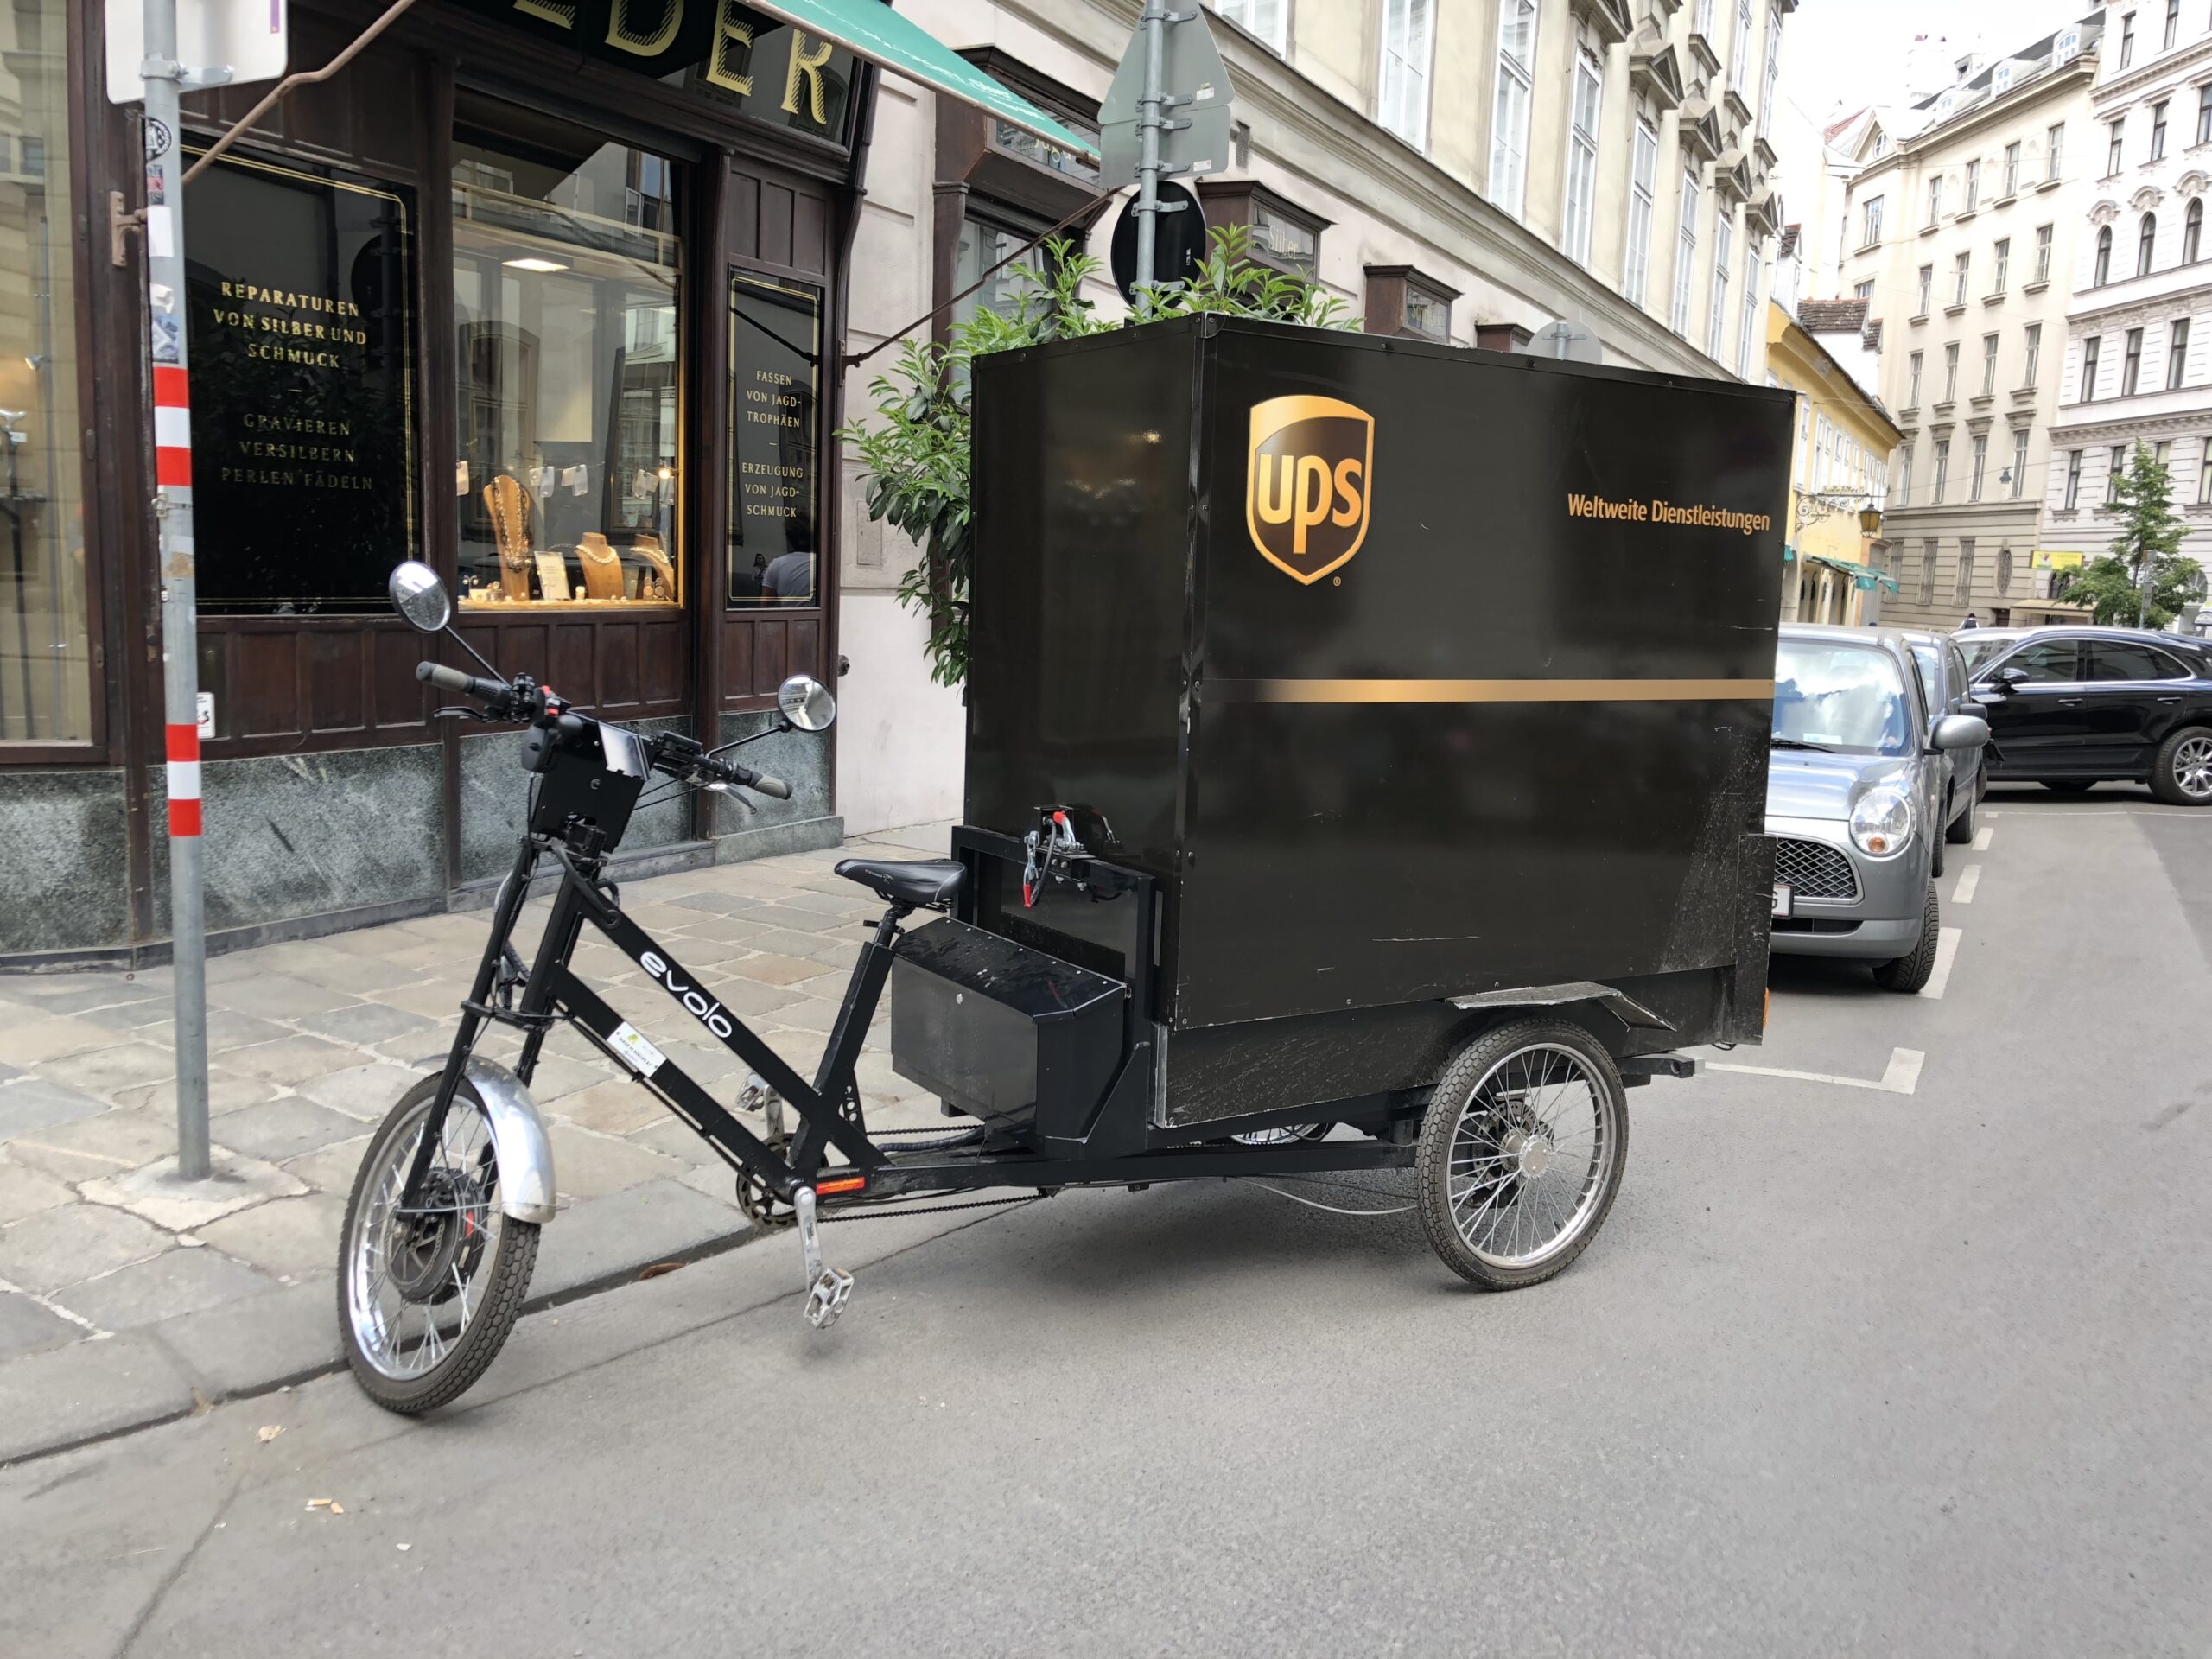 Featured image for “UPS Shipping”